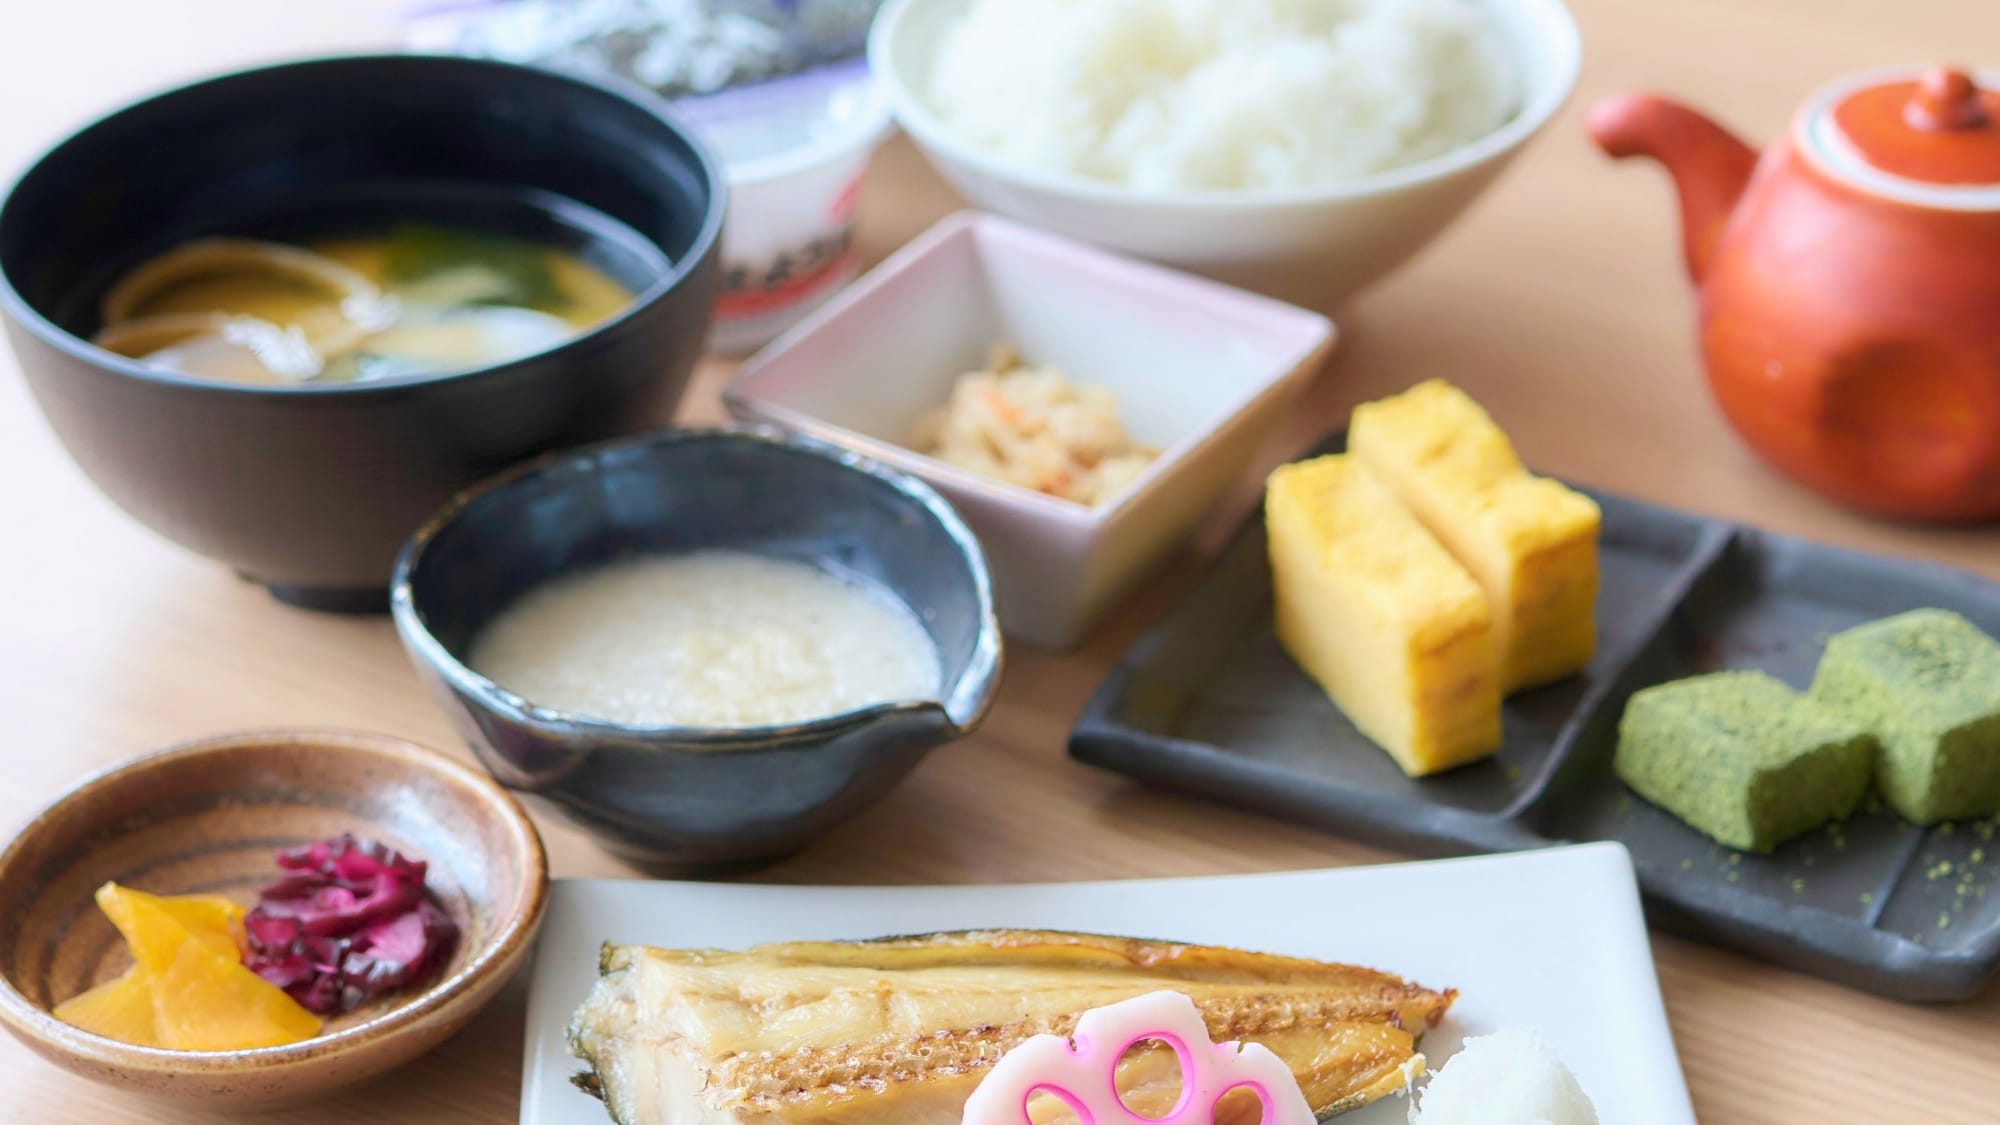 Japanese breakfast: The rice cooked every morning is rated as ``very delicious!'' by our regular customers. *All photos are for illustrative purposes only.